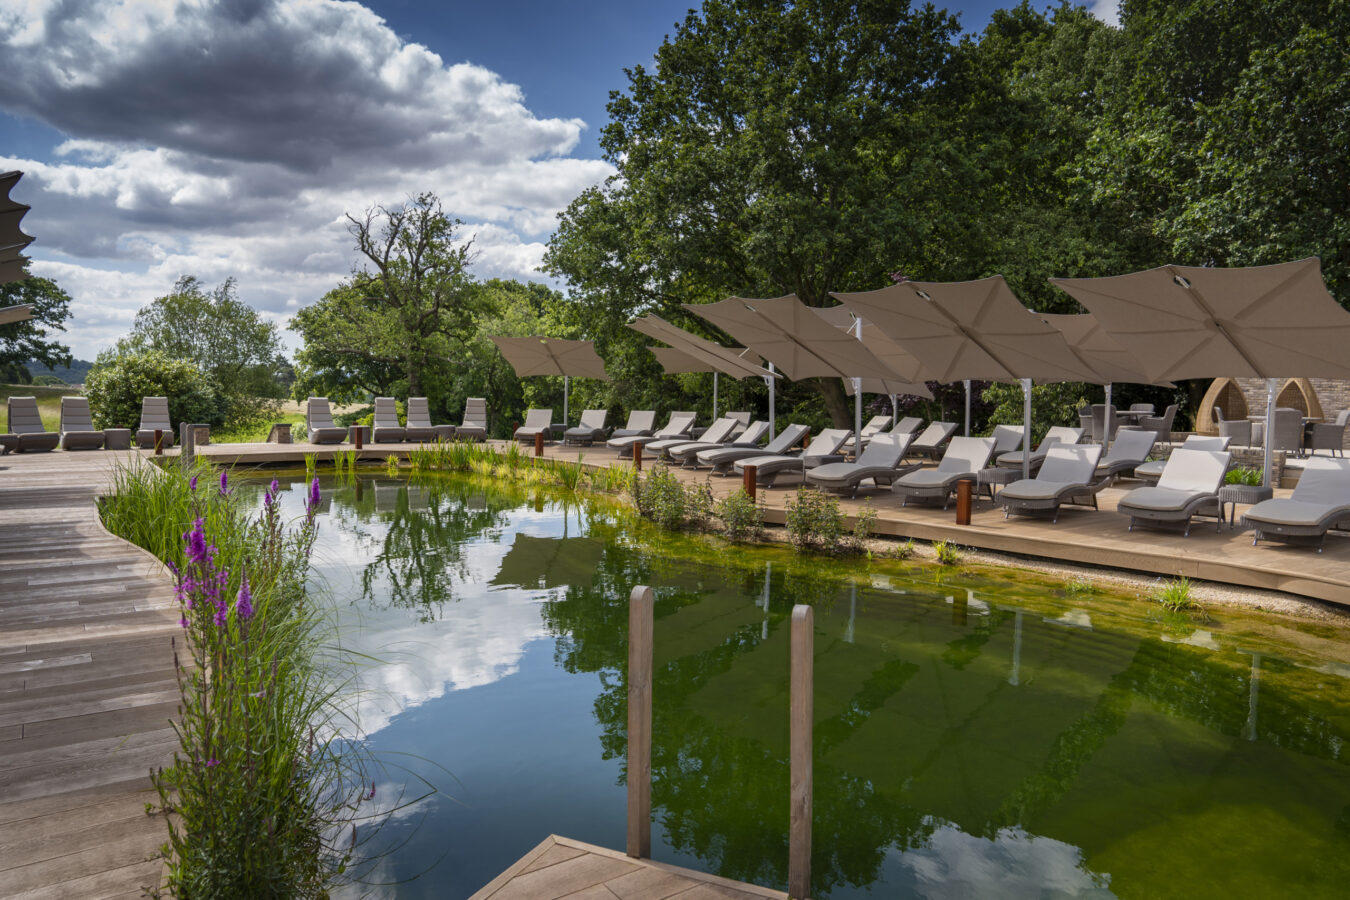 Review - Restore mind, body and soul with a Nature Immersion experience at the Spa at South Lodge